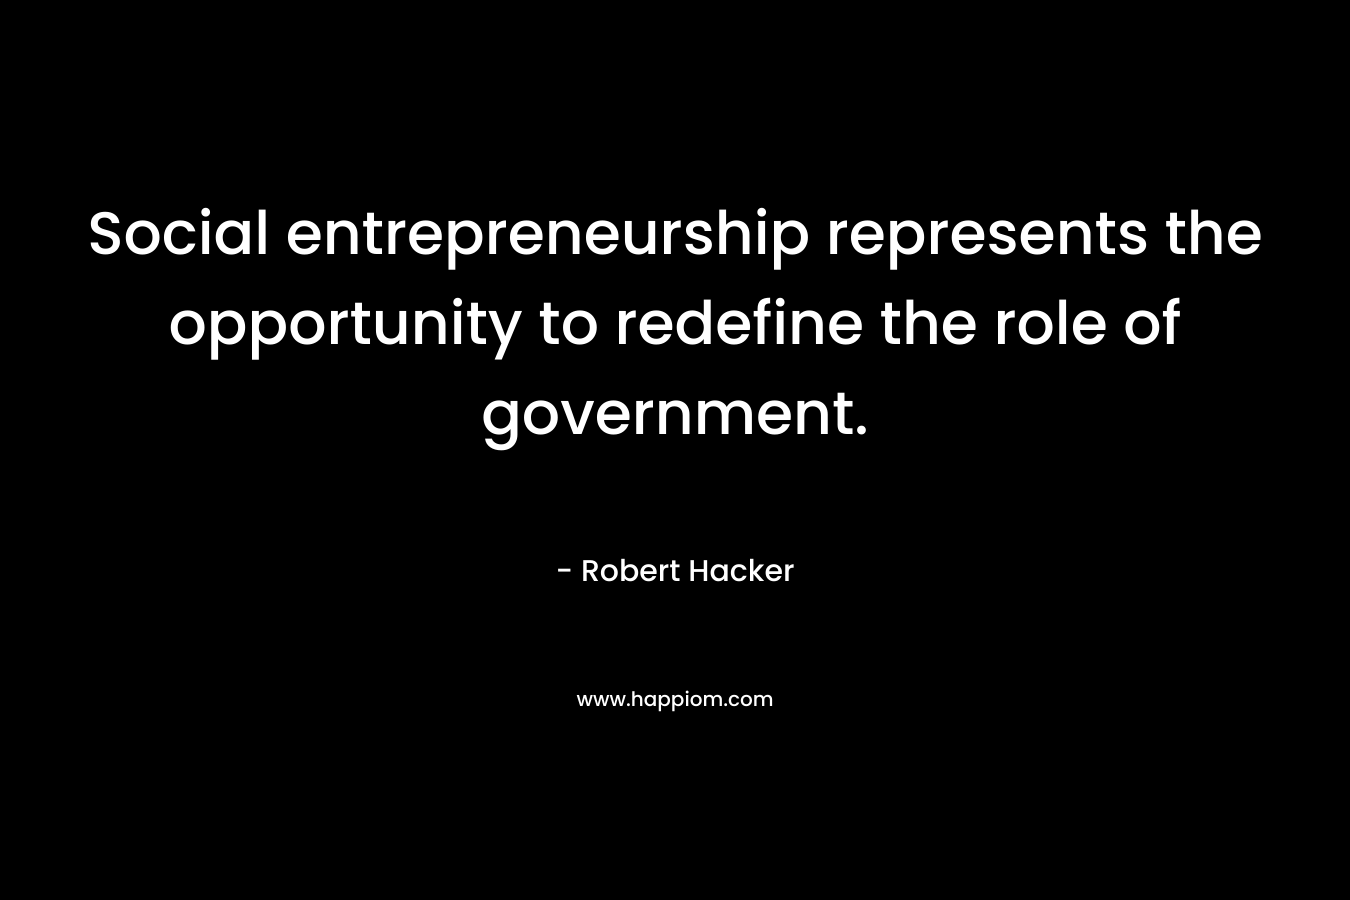 Social entrepreneurship represents the opportunity to redefine the role of government. – Robert Hacker